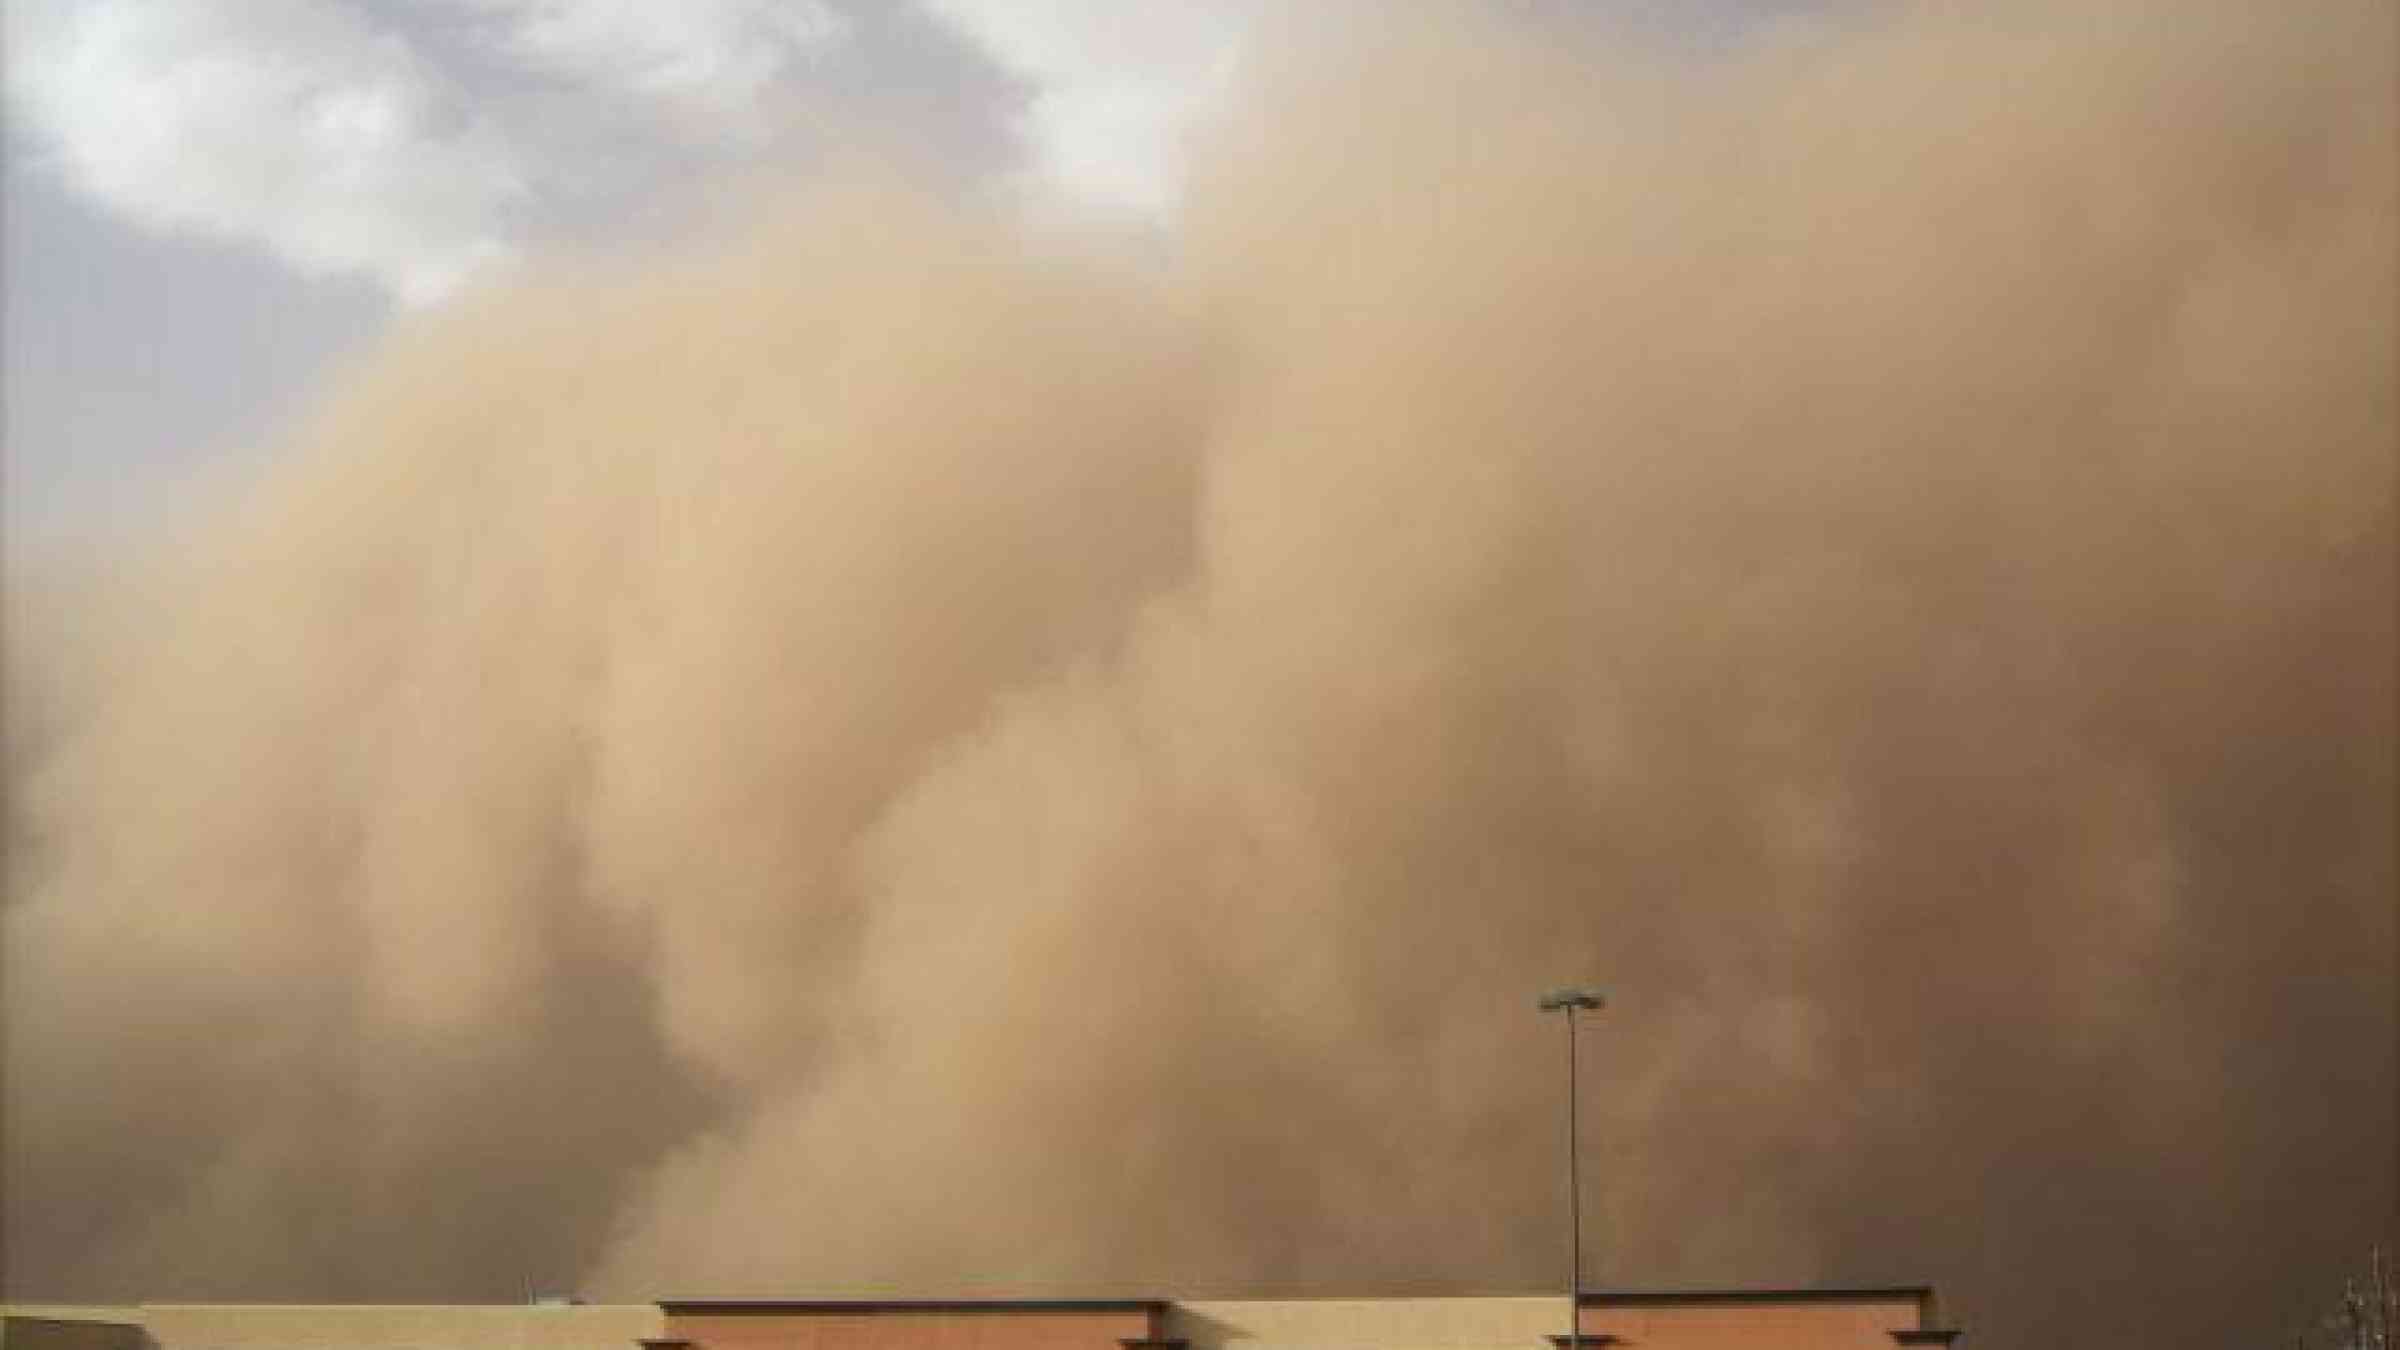 Dust storms are a hazard of climate change, yet leading financial disclosure initiatives fail to include this and other hazards in their physical climate risk assessment guidance. amazingsdj/Pixabay